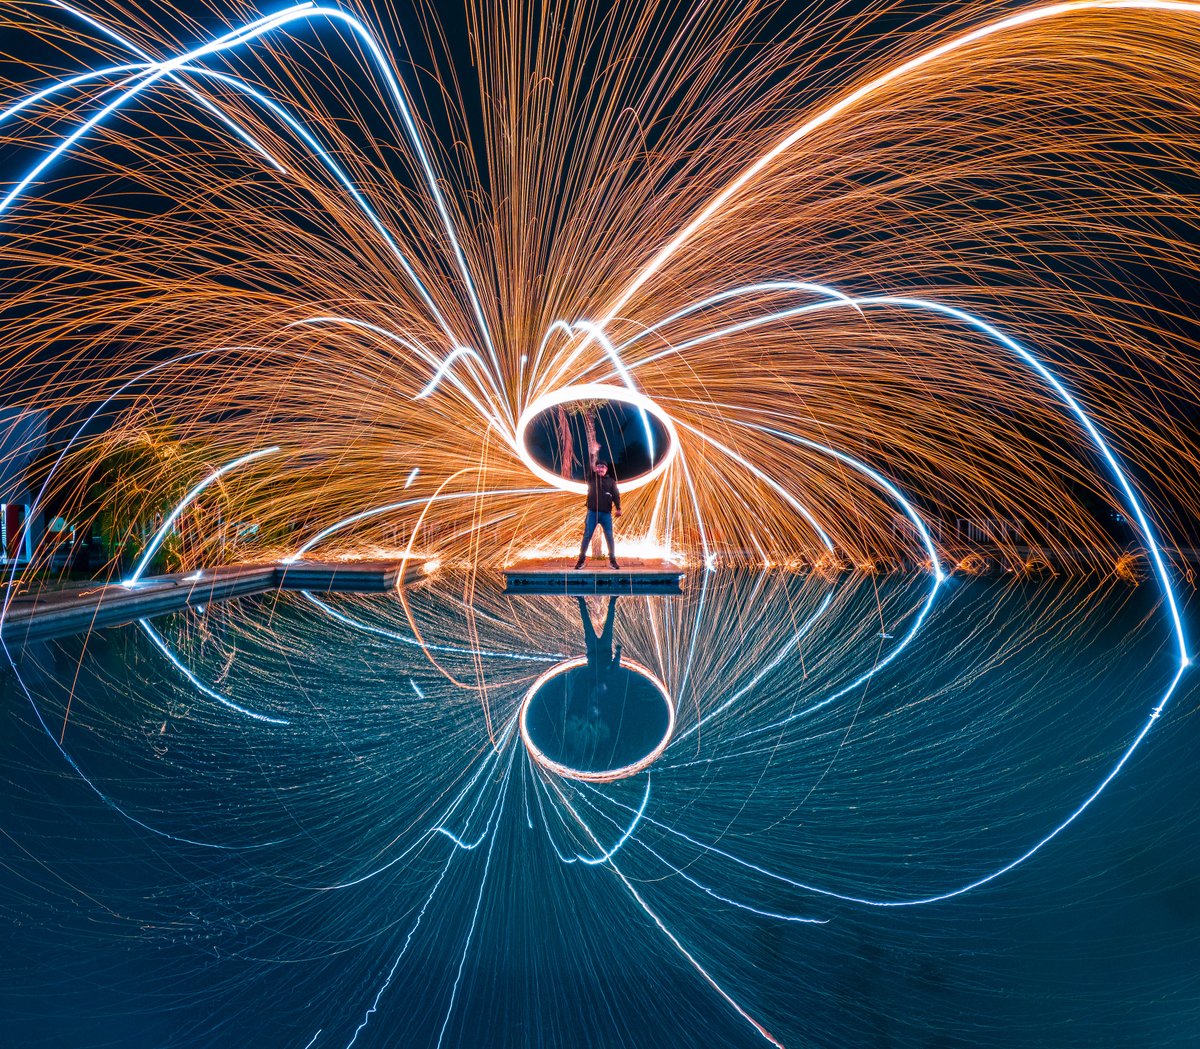 Photo of the Day: Playing with fire 🔥 Captured with Night Photo Mode on #GoProHERO12 Black by Kami Pastrana for a $500 GoPro Award. #GoPro #GoProAwards #LongExposure #SteelWool #Reflection #Pyrotechnics